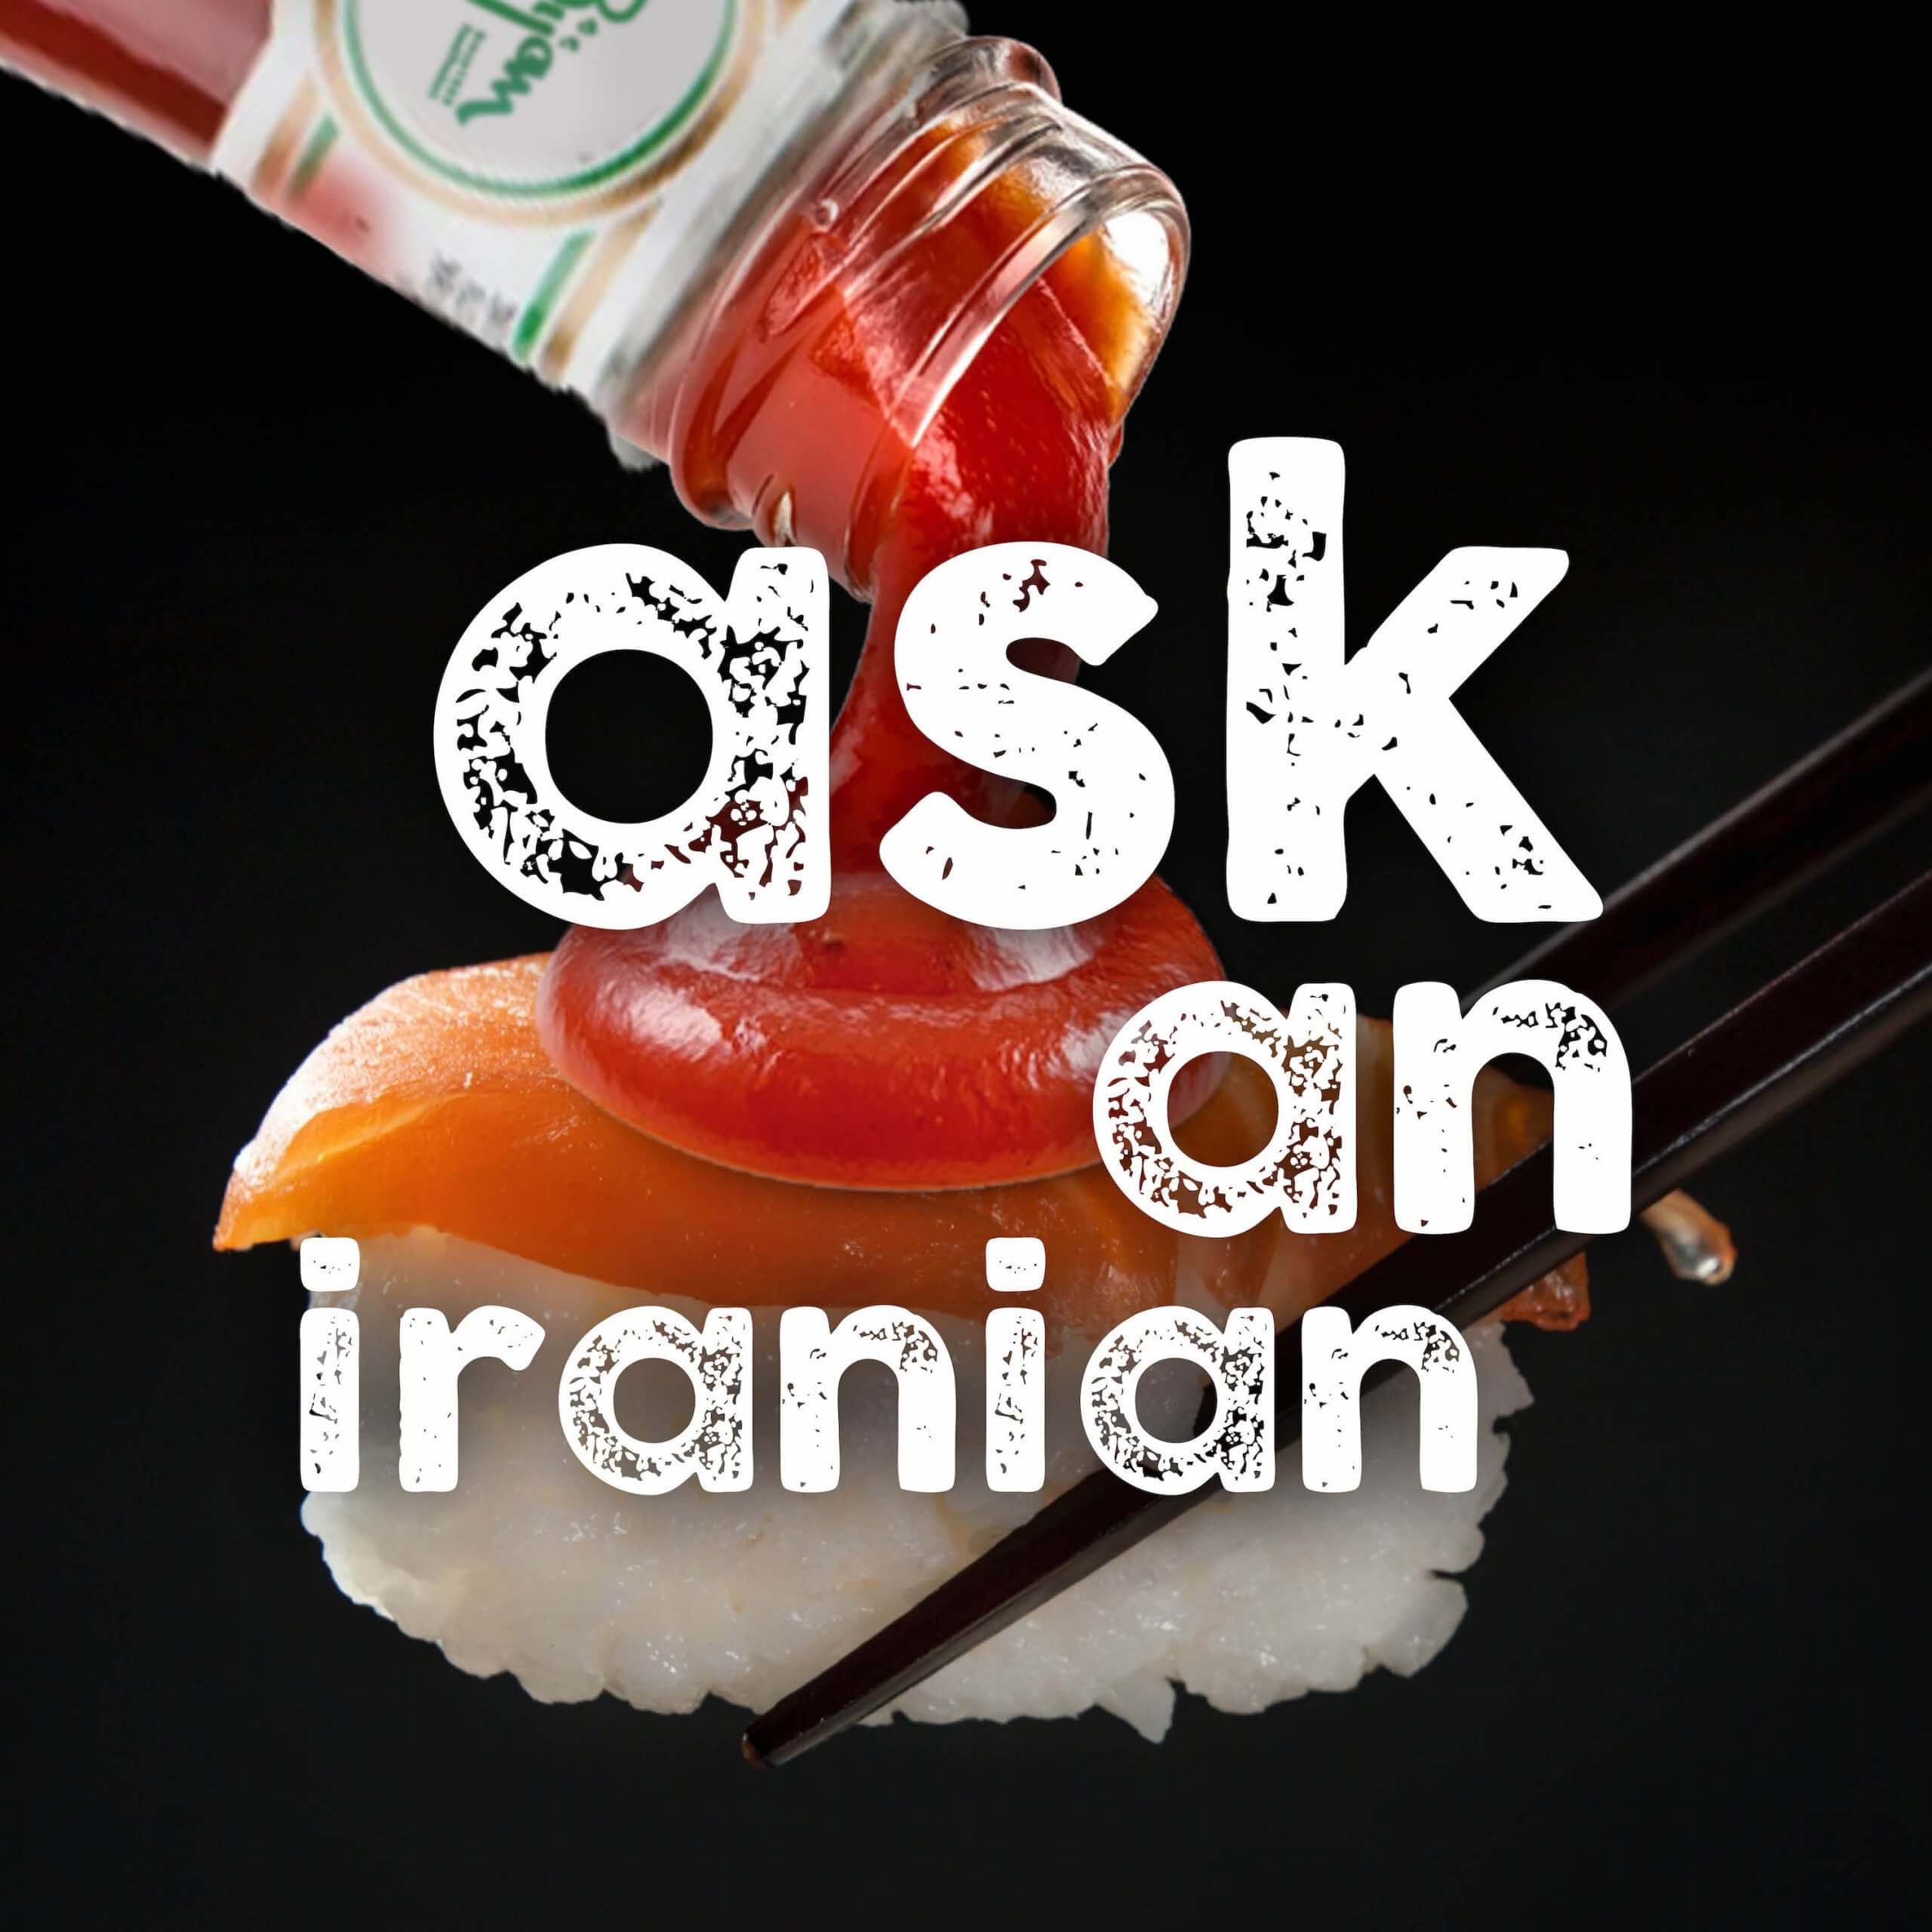 What do Japanese people think of Iranian-made sushi?